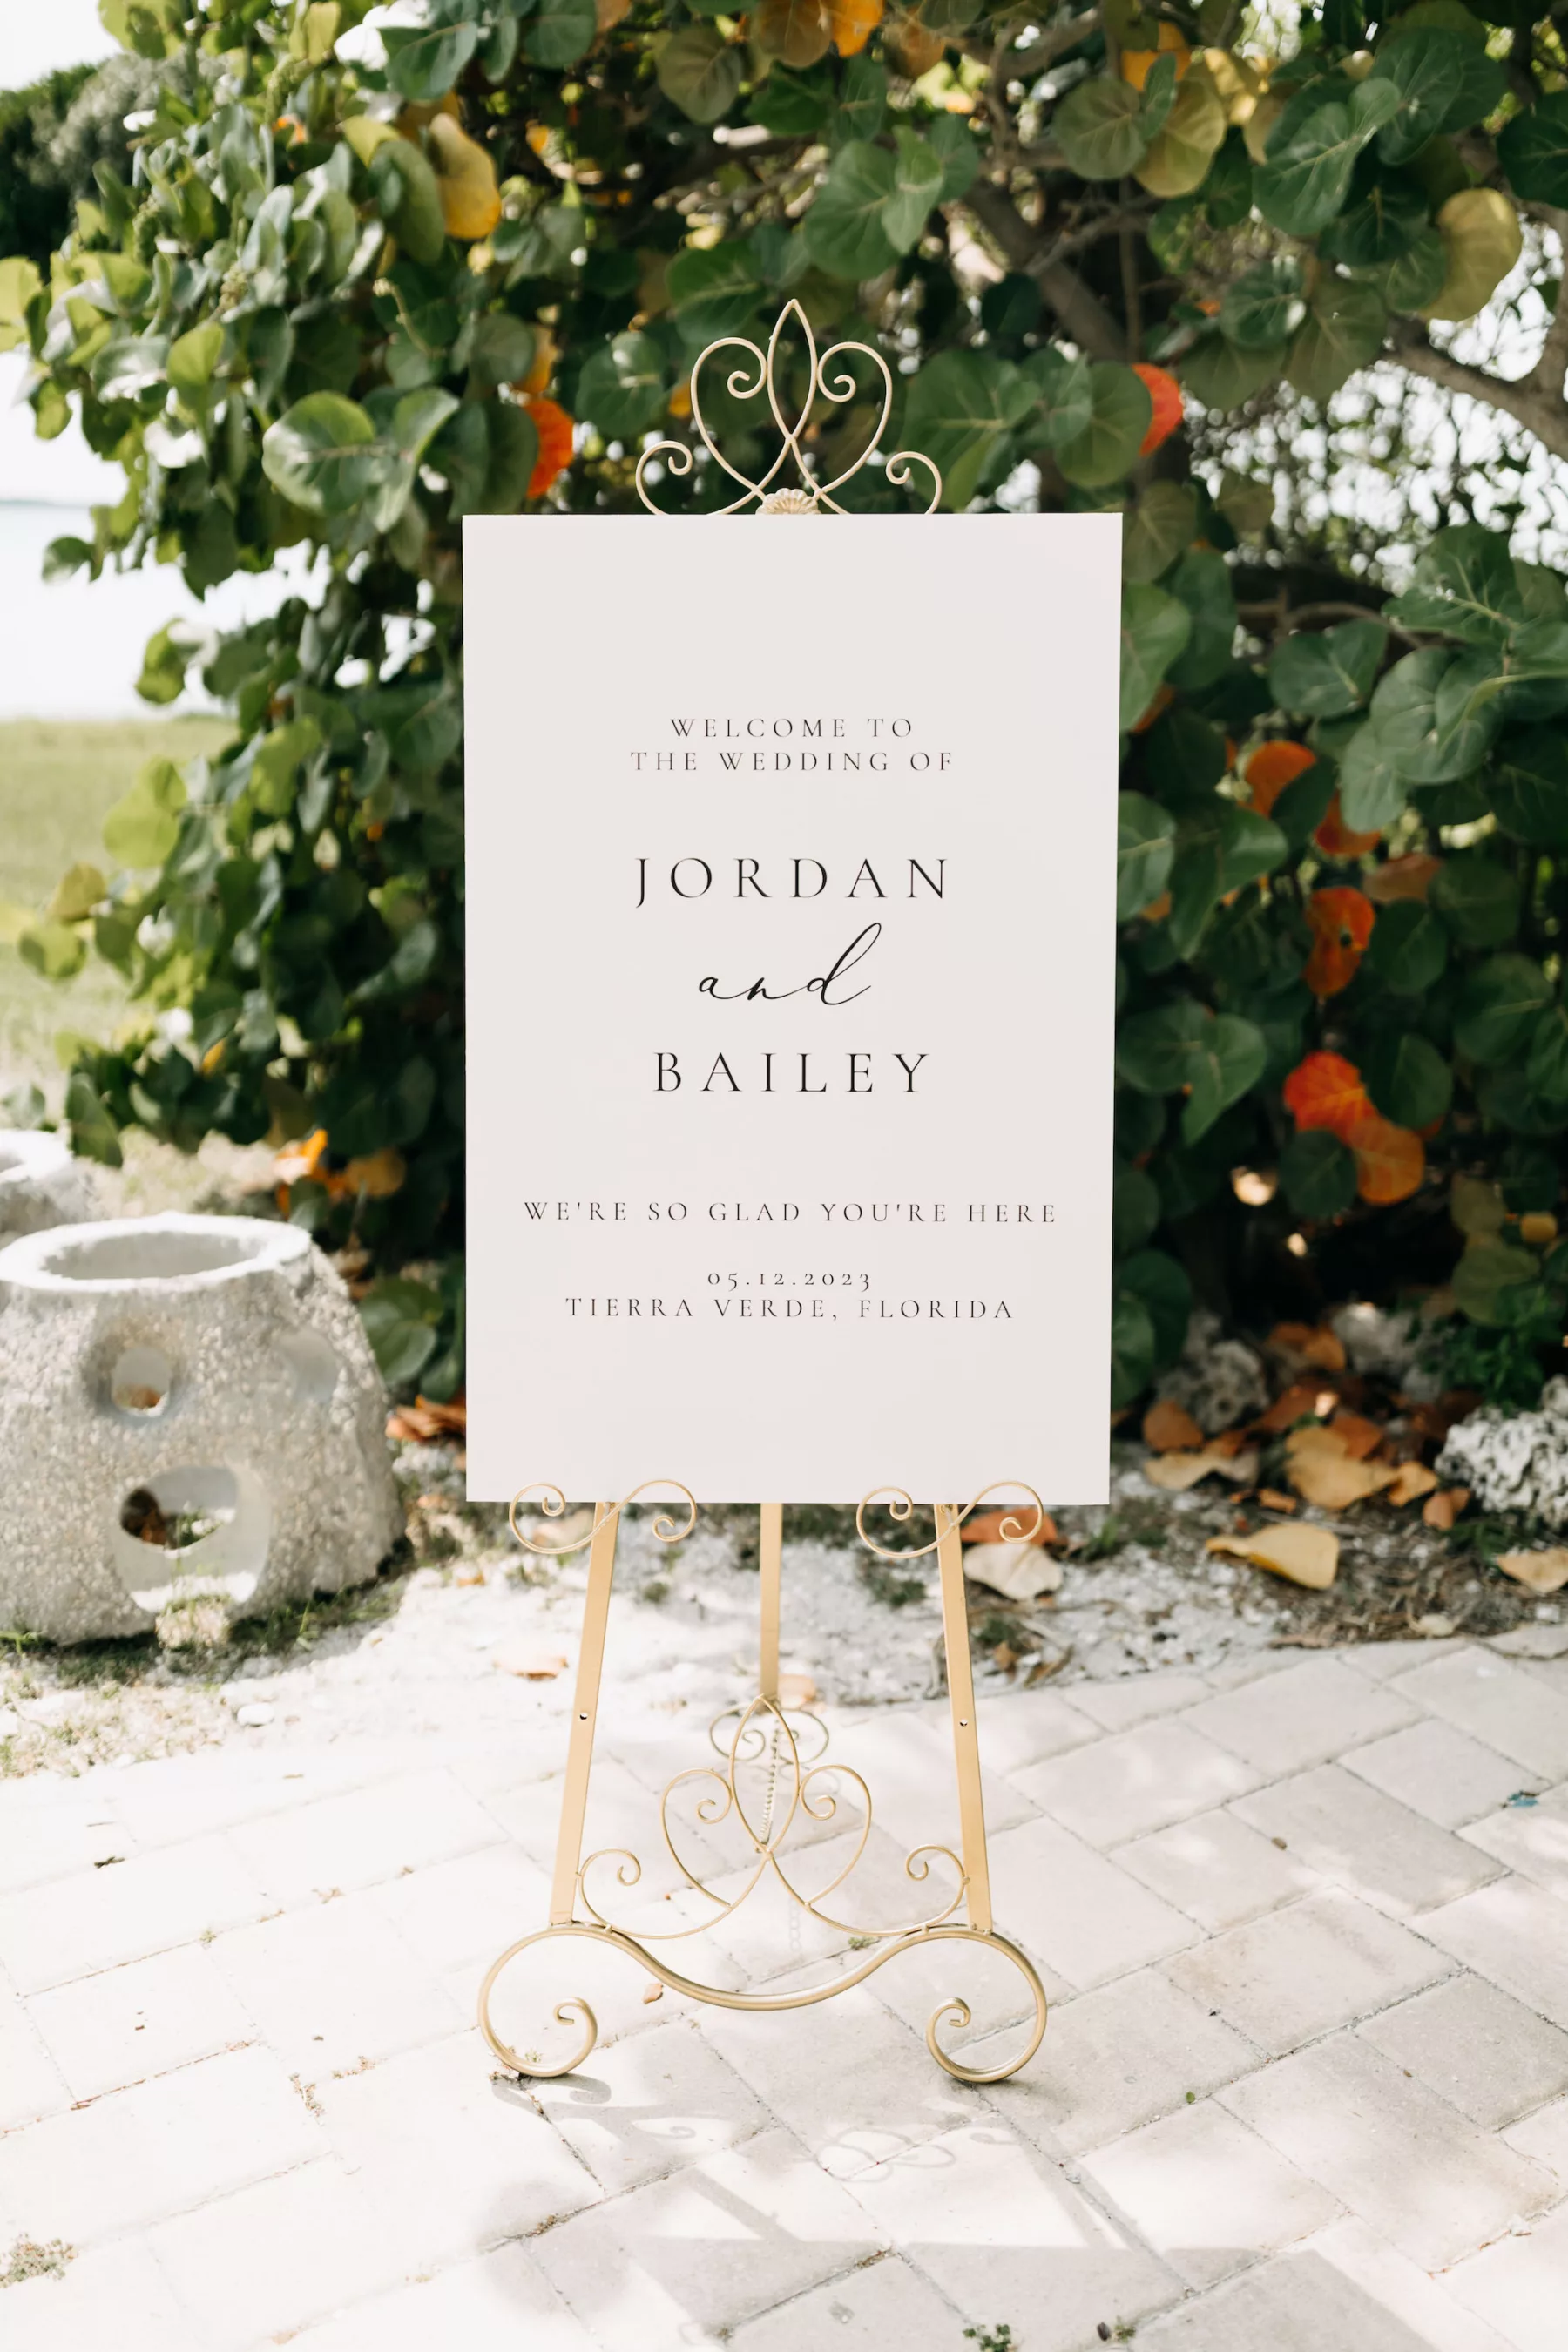 Classic Black and White Welcome Wedding Ceremony Sign Ideas